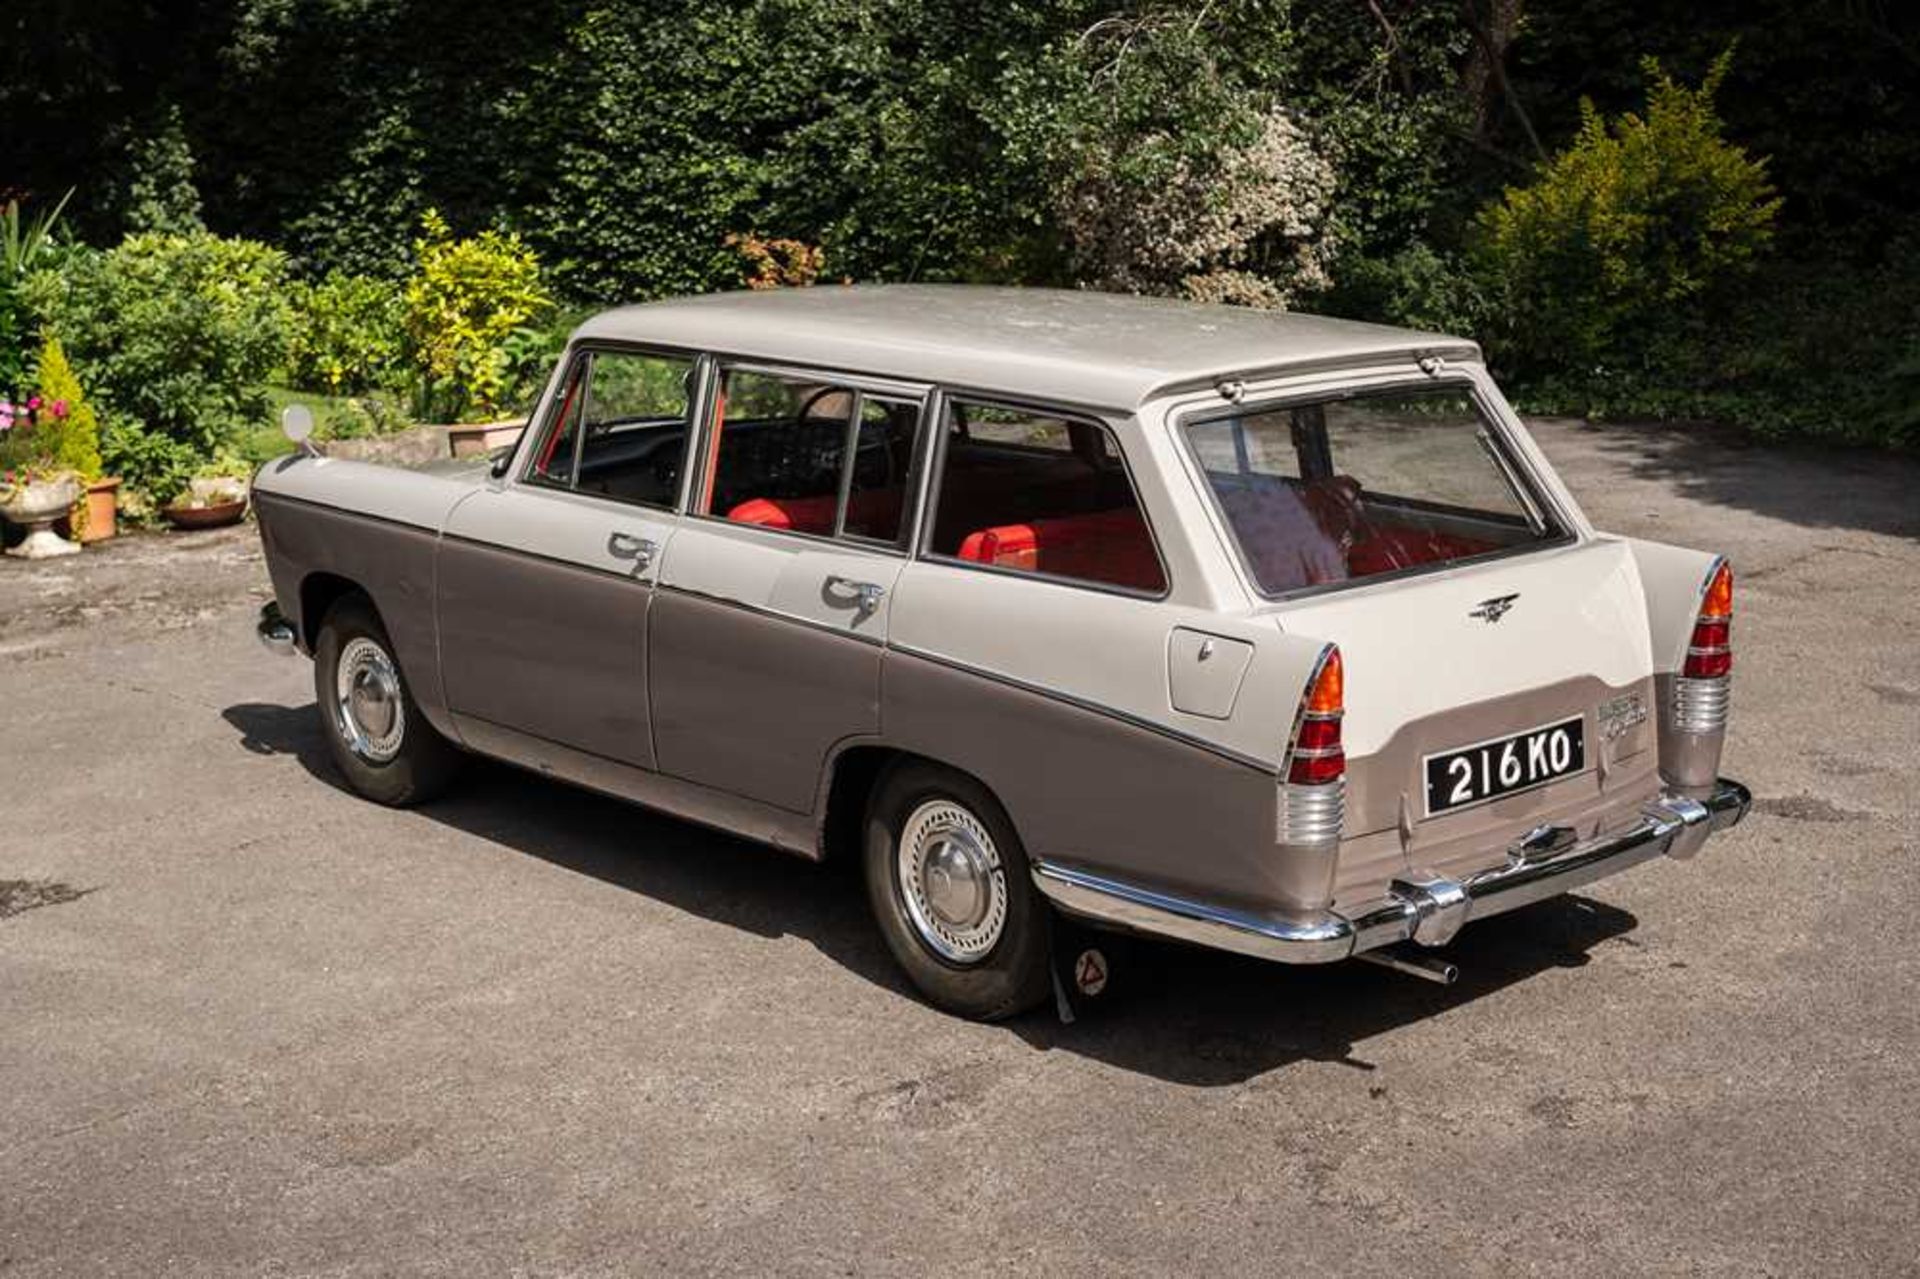 1964 Morris Oxford Series VI Farina Traveller Just 7,000 miles from new - Image 14 of 98